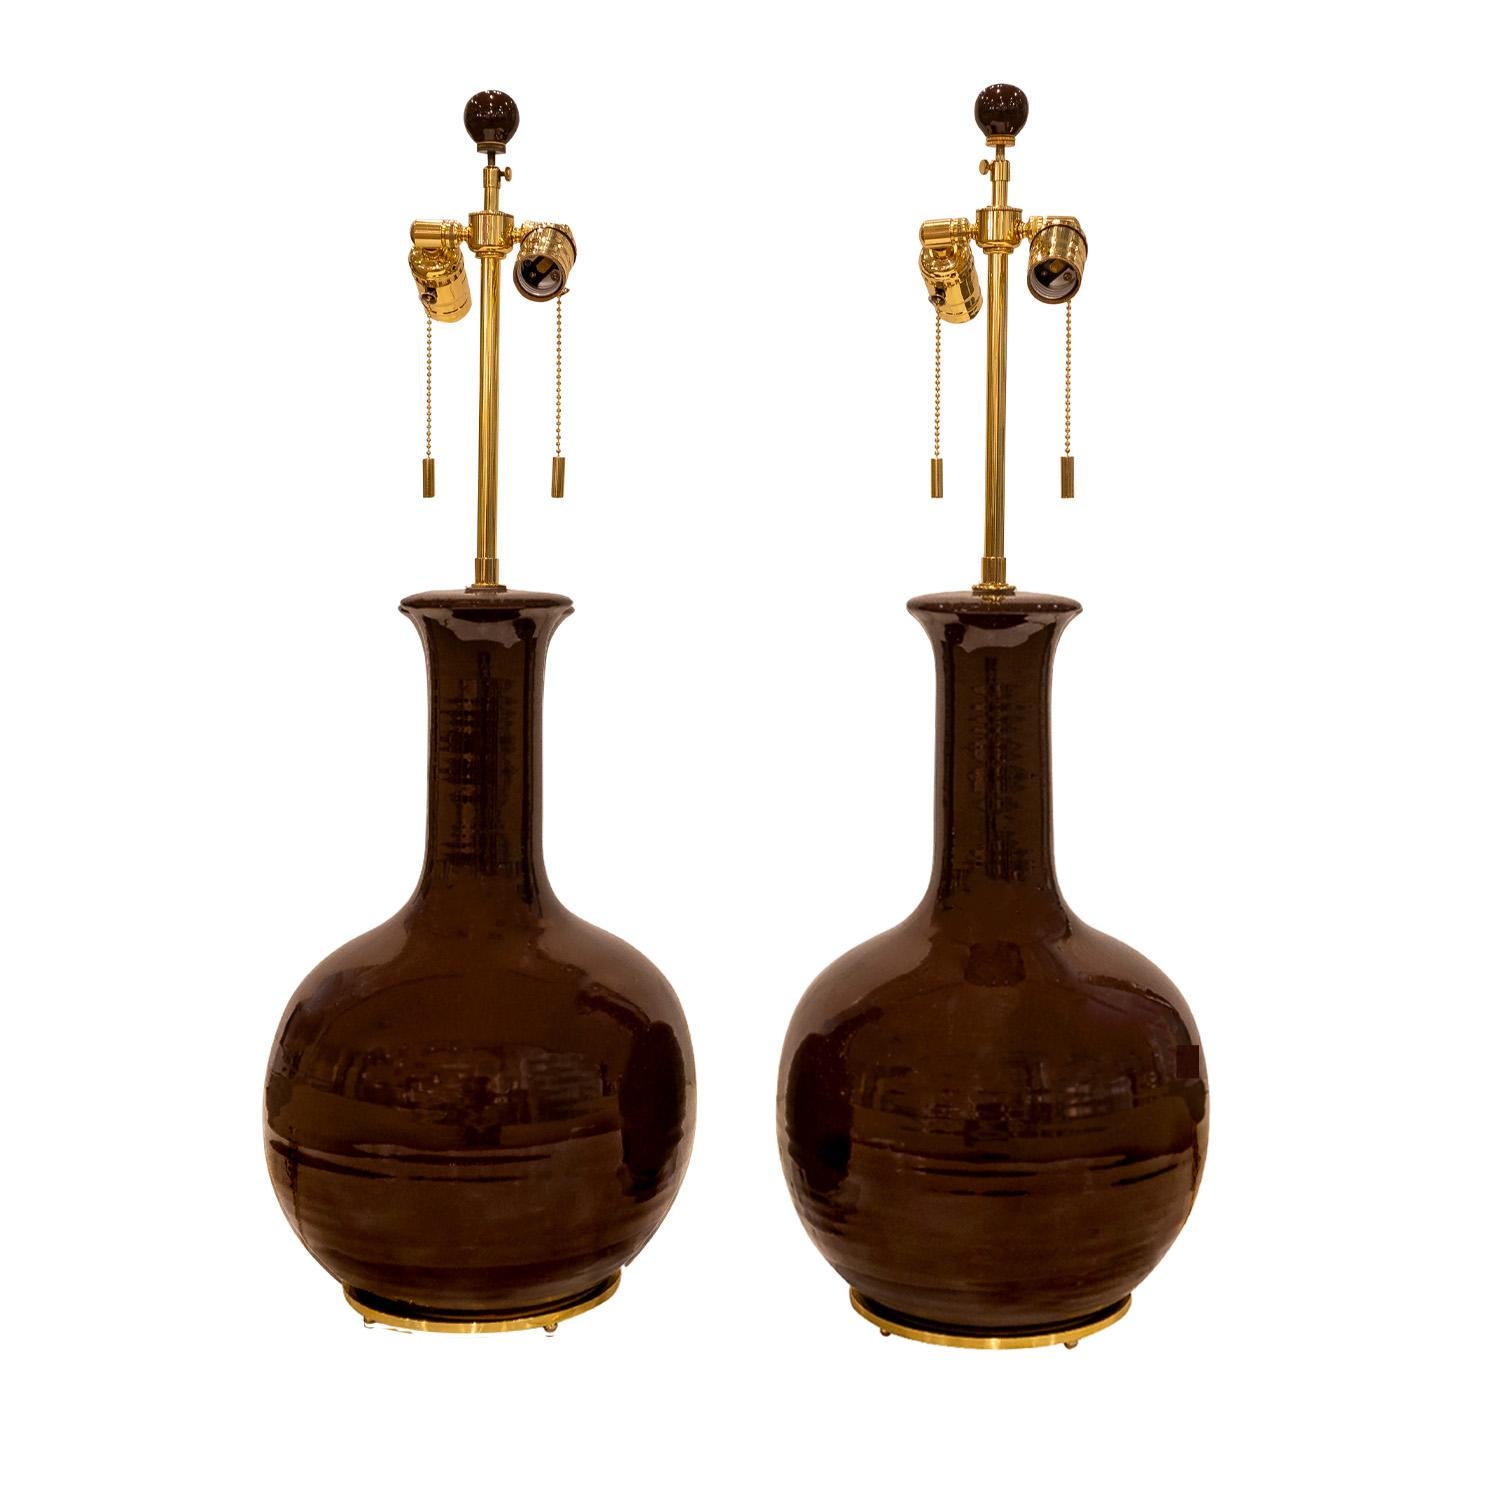 Mid-Century Modern Pair of Exquisite Artisan Porcelain Lamps with Polished Brass Hardware 1960s For Sale